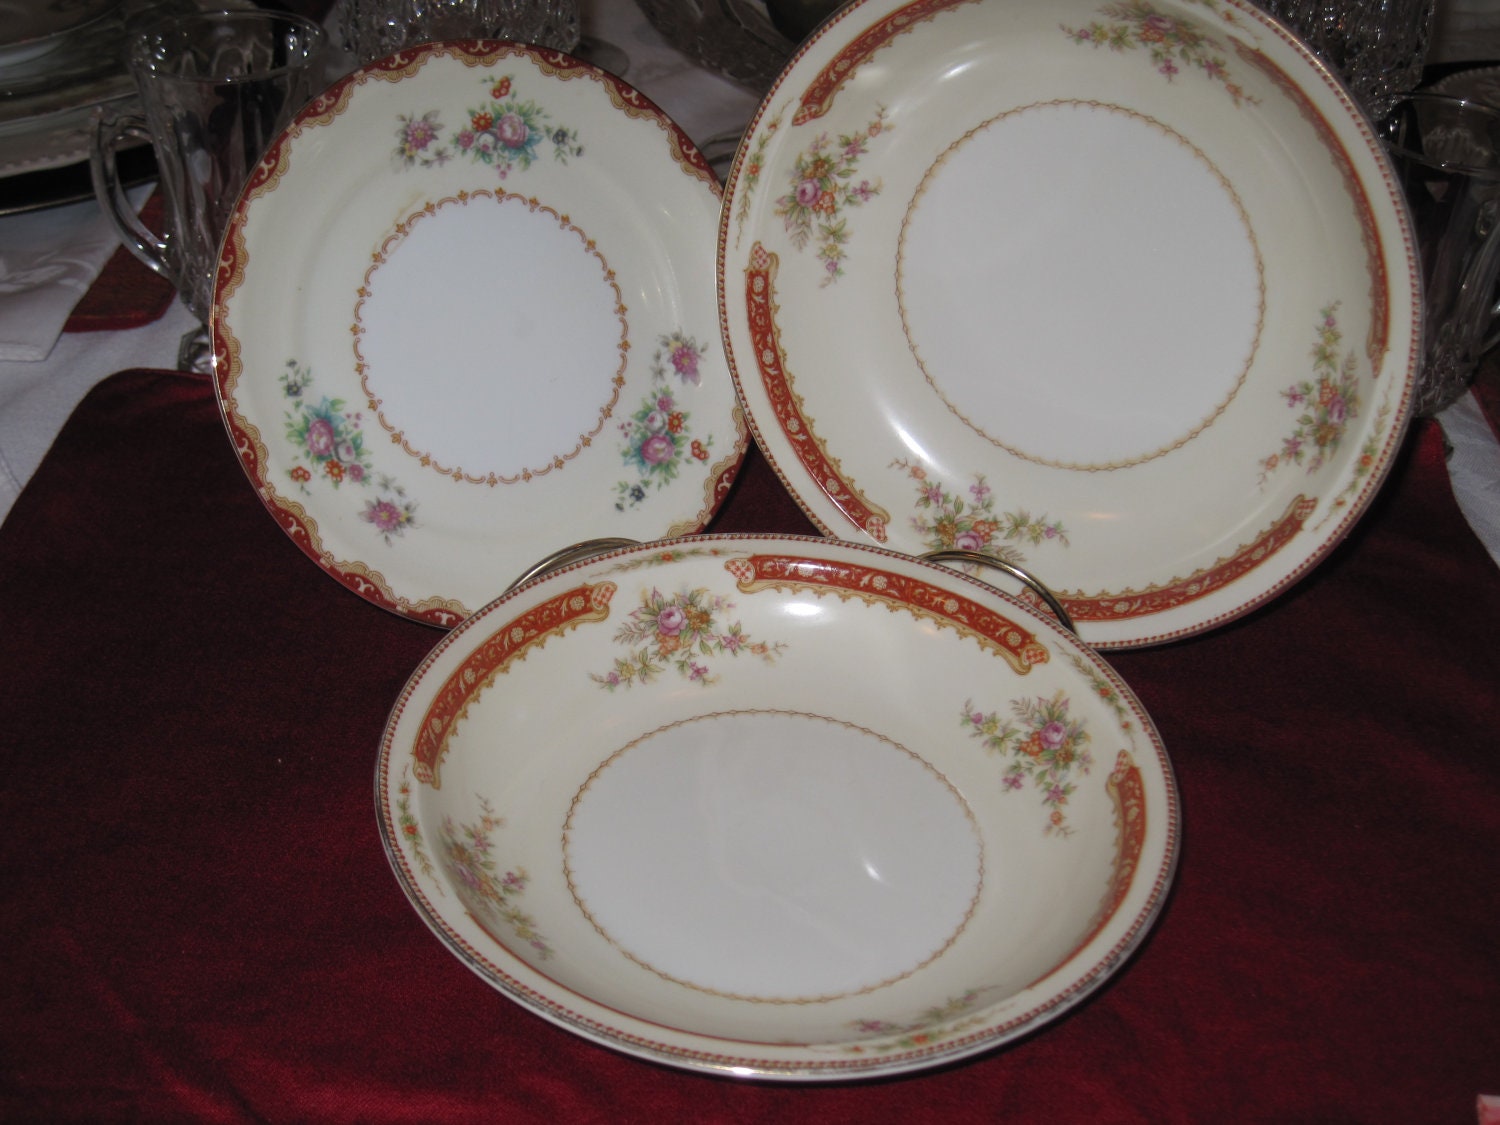 Three Piece Meito China Made In Occupied Japan By GenevasJewel.